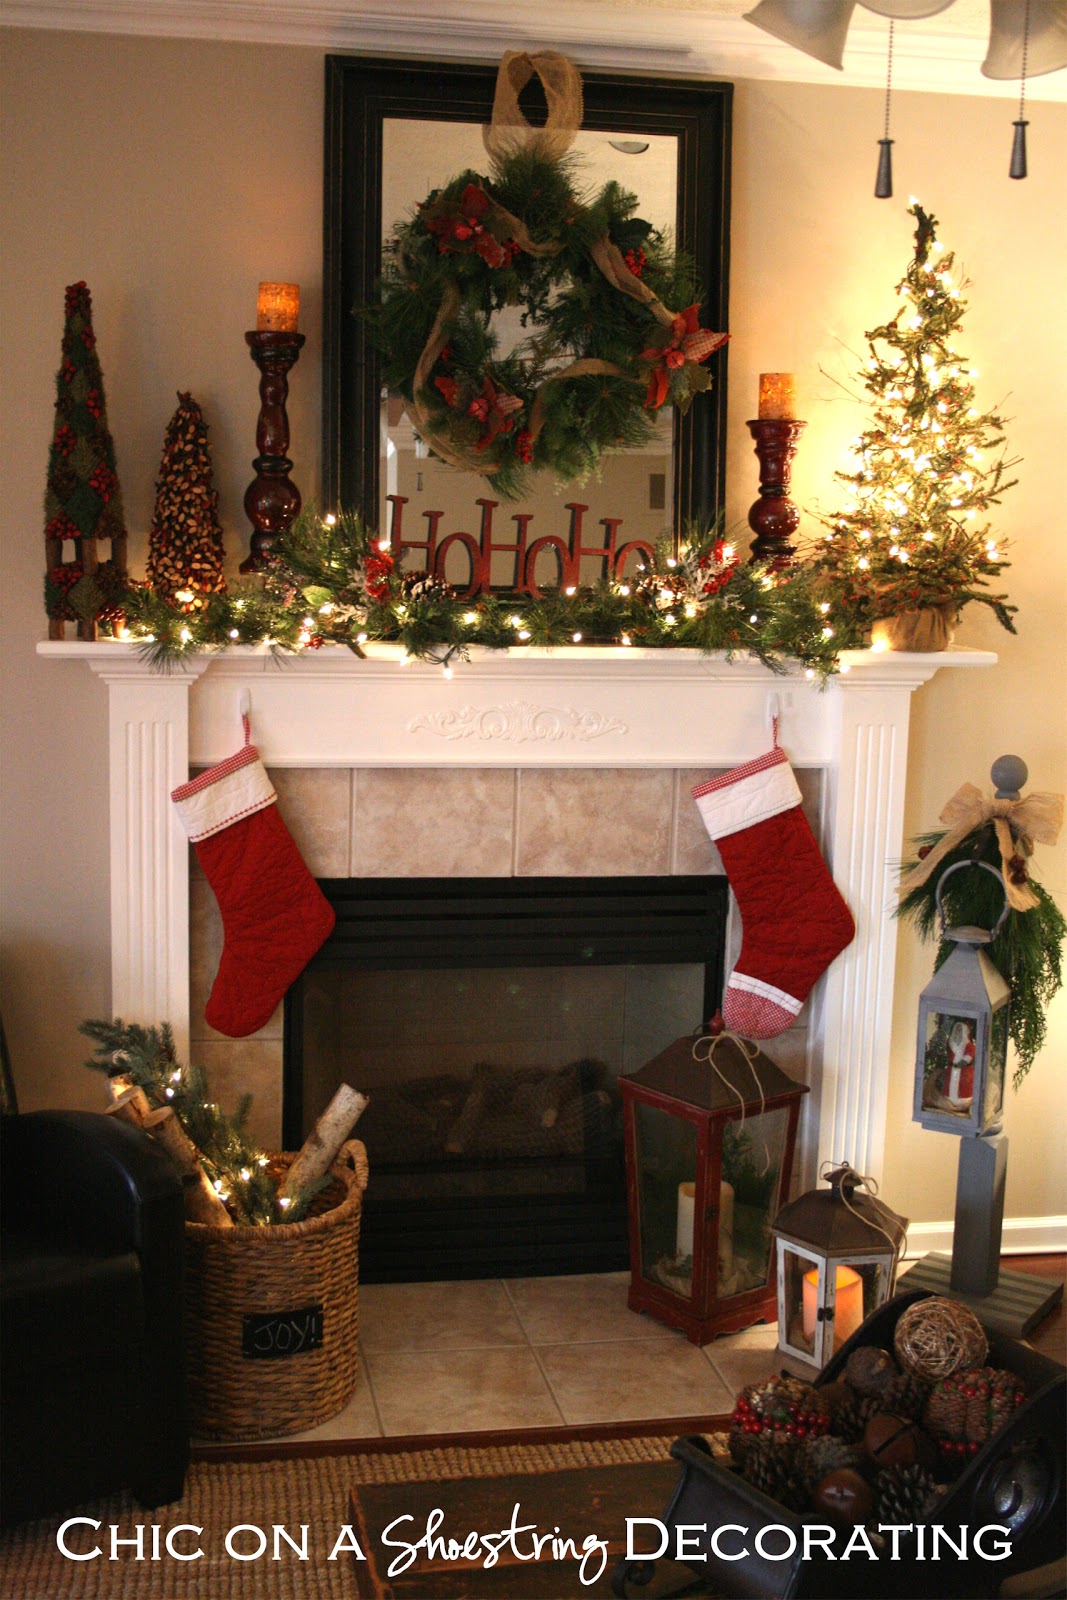 Chic on a Shoestring Decorating  Christmas  Home Tour Part 